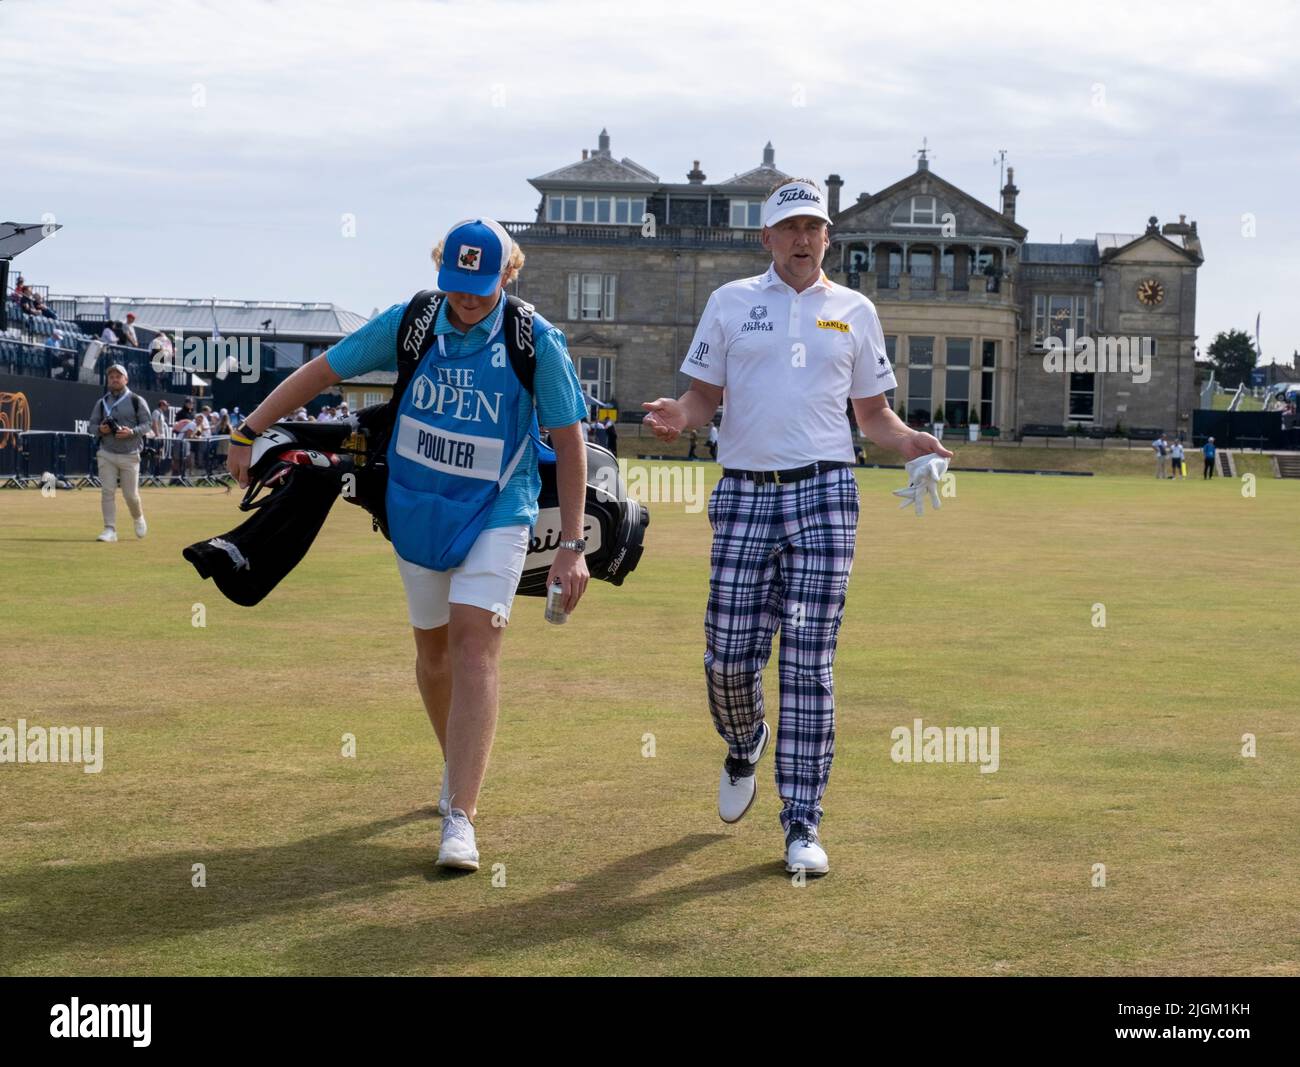 150th Open GolfChampionships, St Andrews, July 11th 2022 Ian Poulter walks down the 1st fairway during a practice round at the Old Course, St Andrews, Scotland. Credit: Ian Rutherford/Alamy Live News. Stock Photo